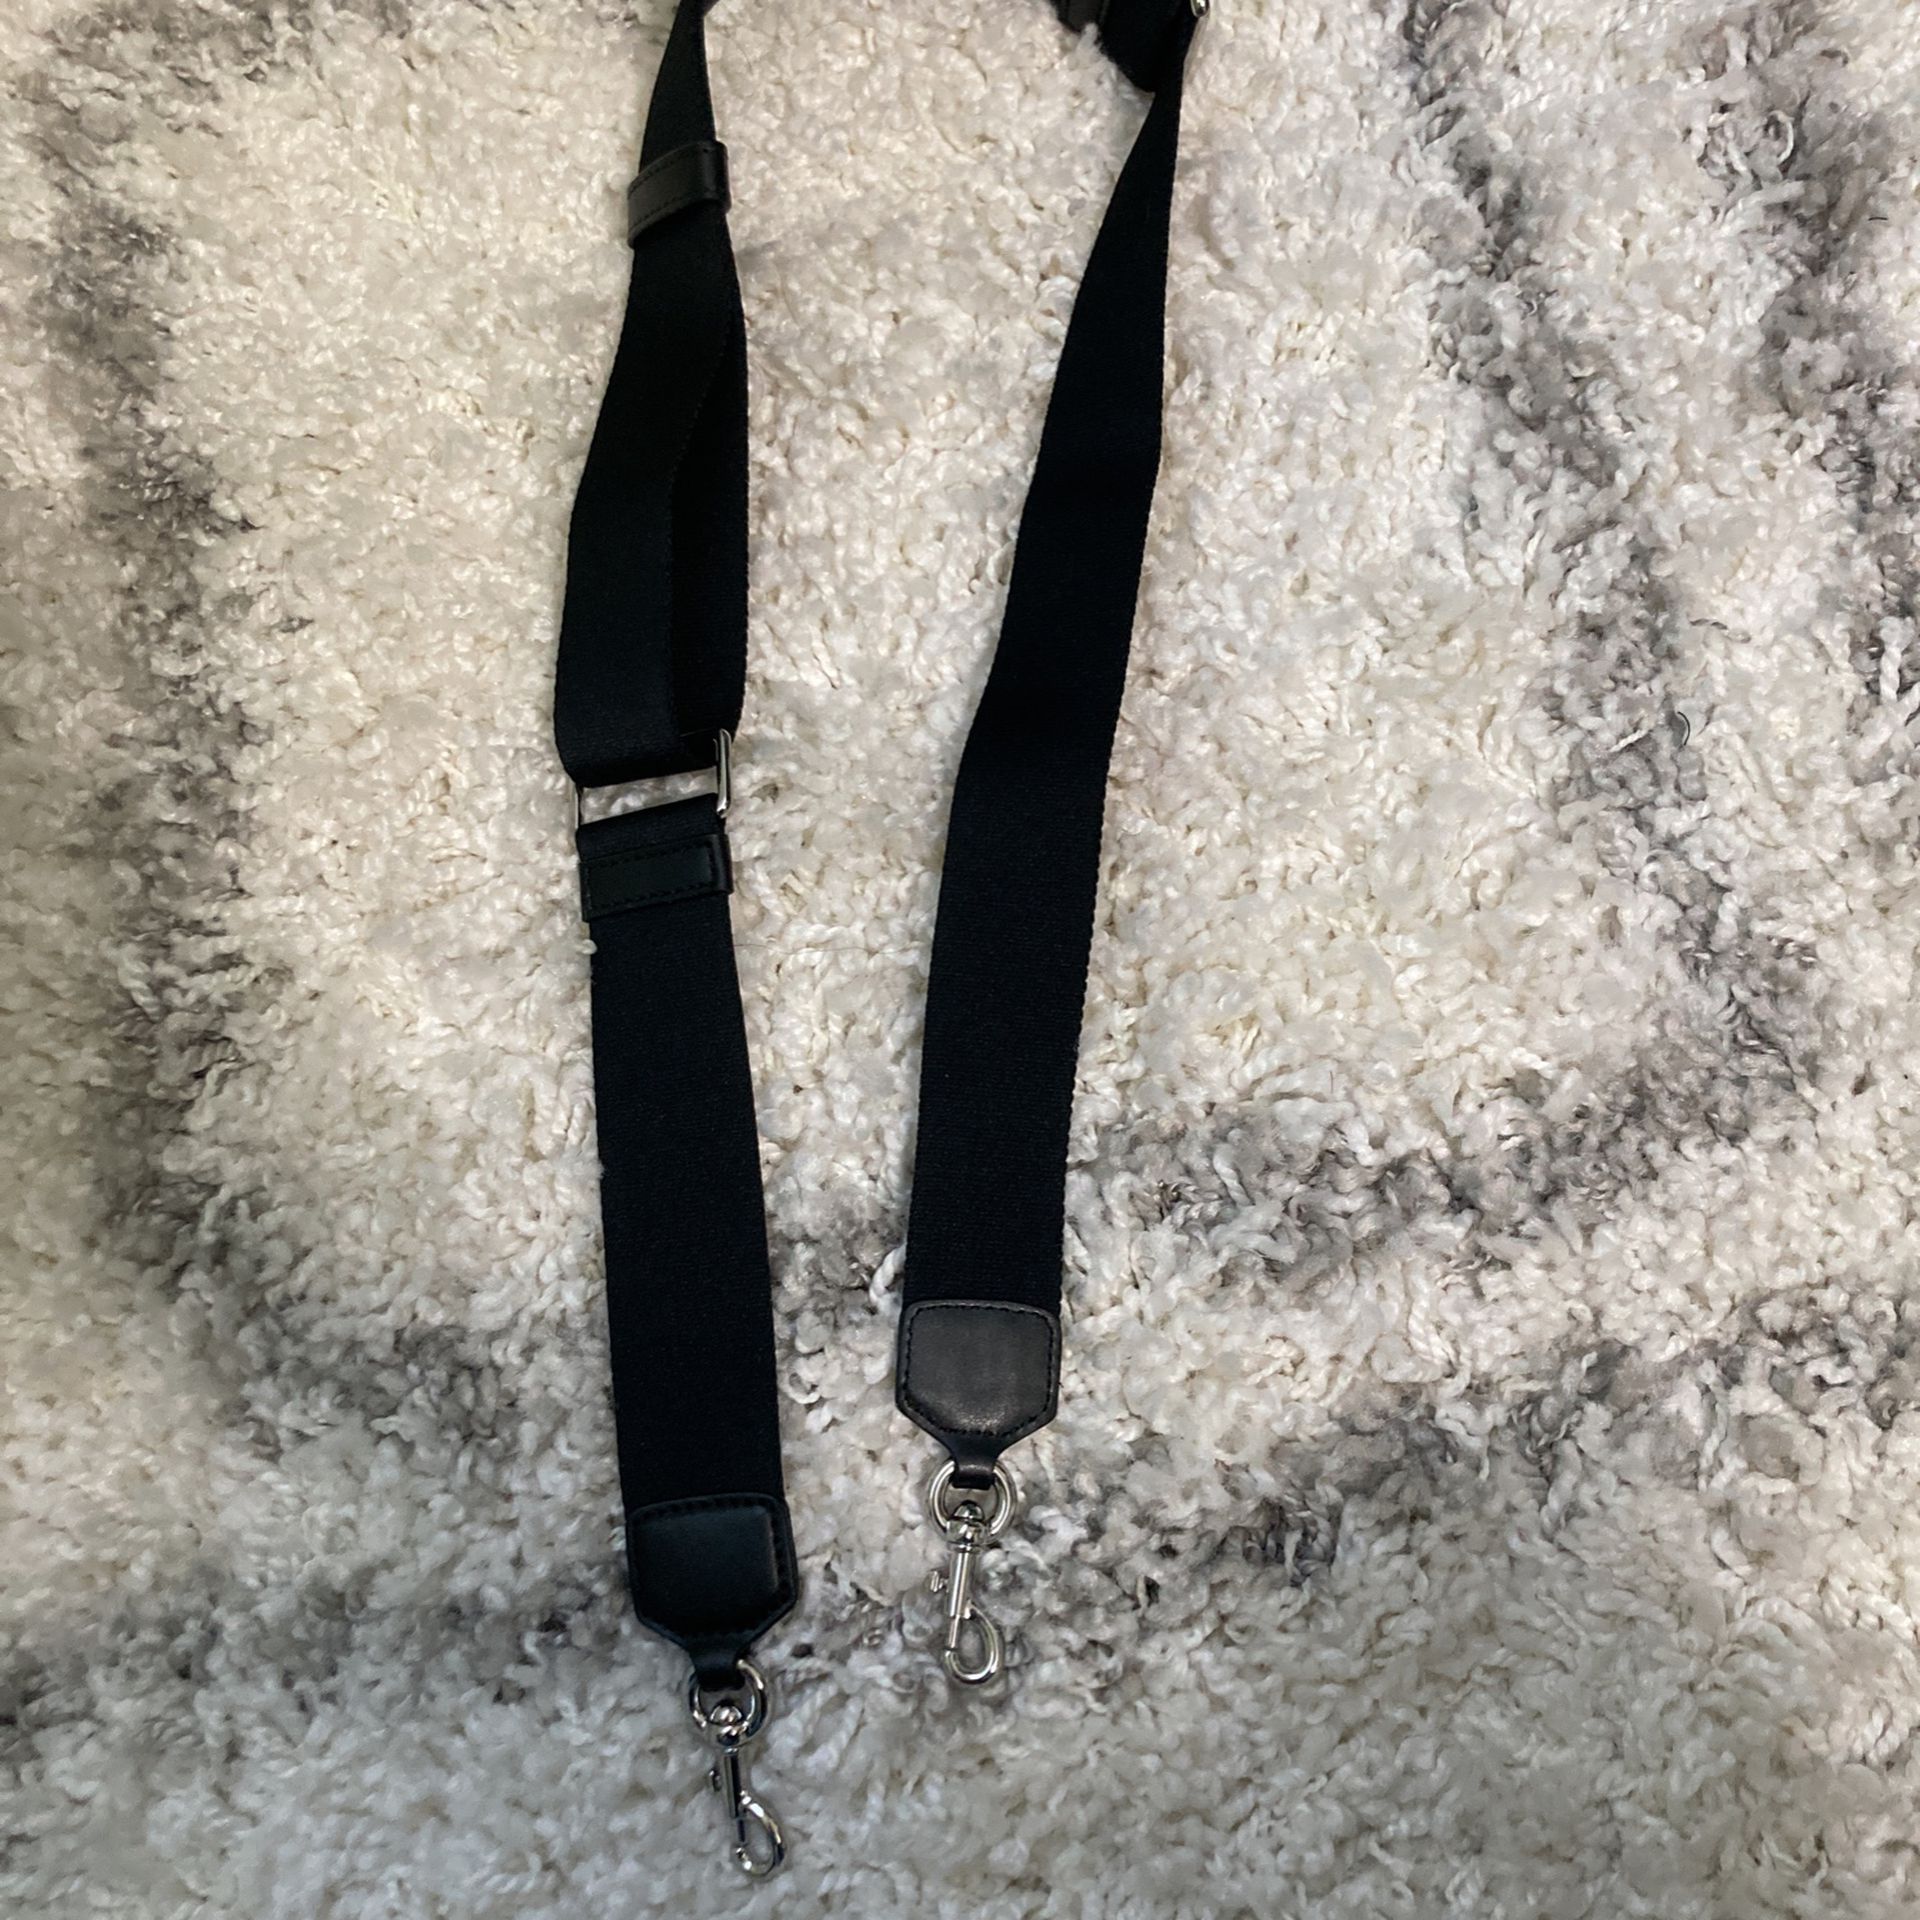 Rebecca Minkoff Embroidered Bag Strap for Sale in Fairfield, CA - OfferUp